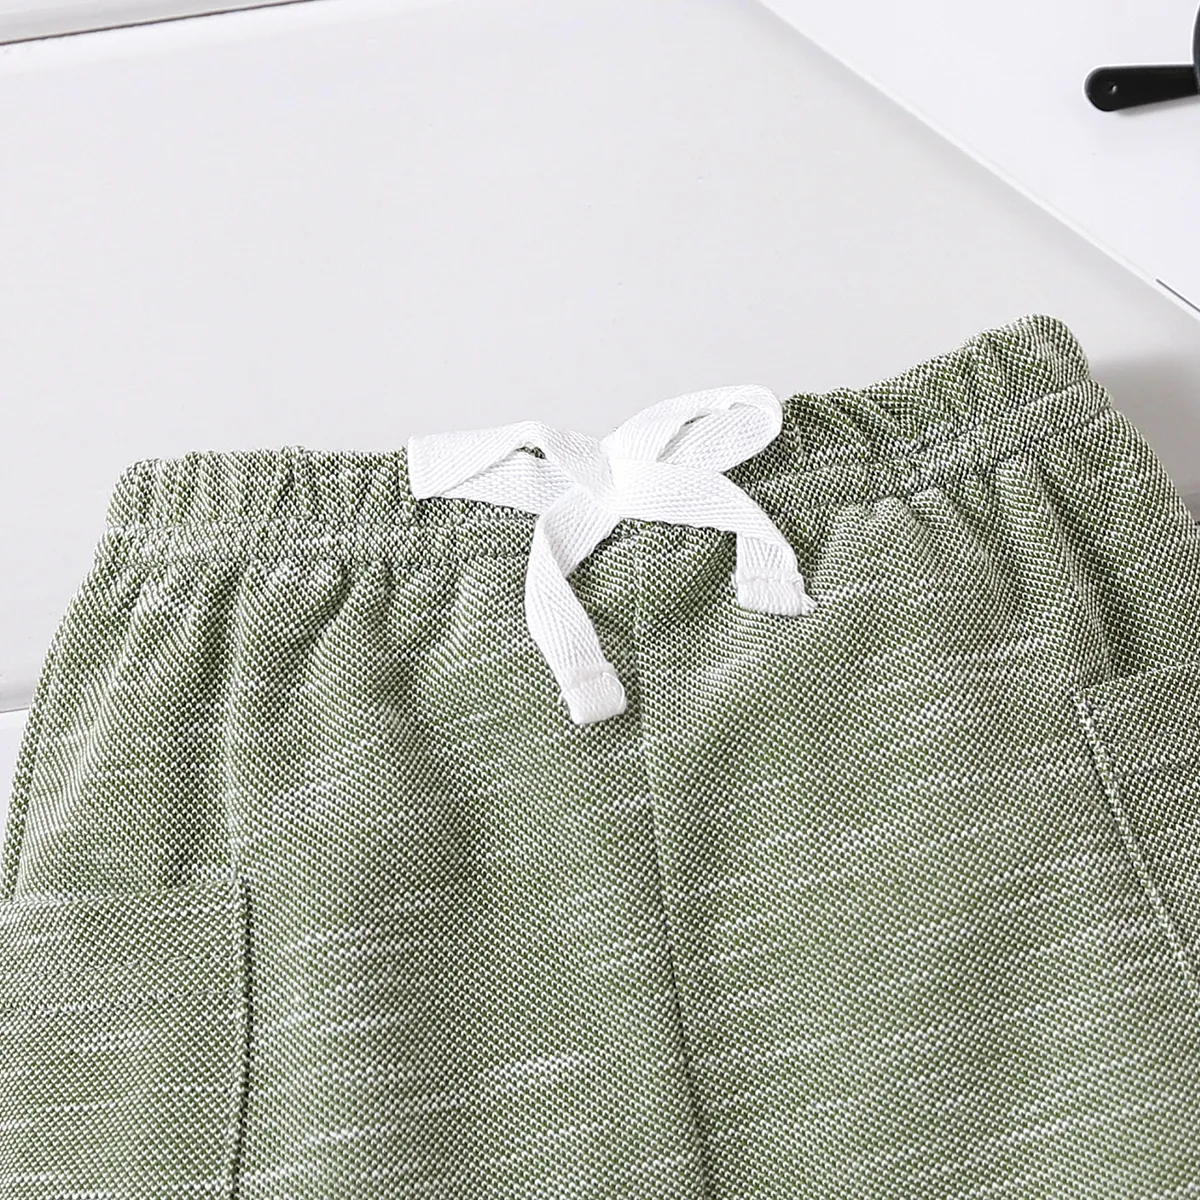 Baby Boy Solid Patch Pocket Shorts Green big image 1